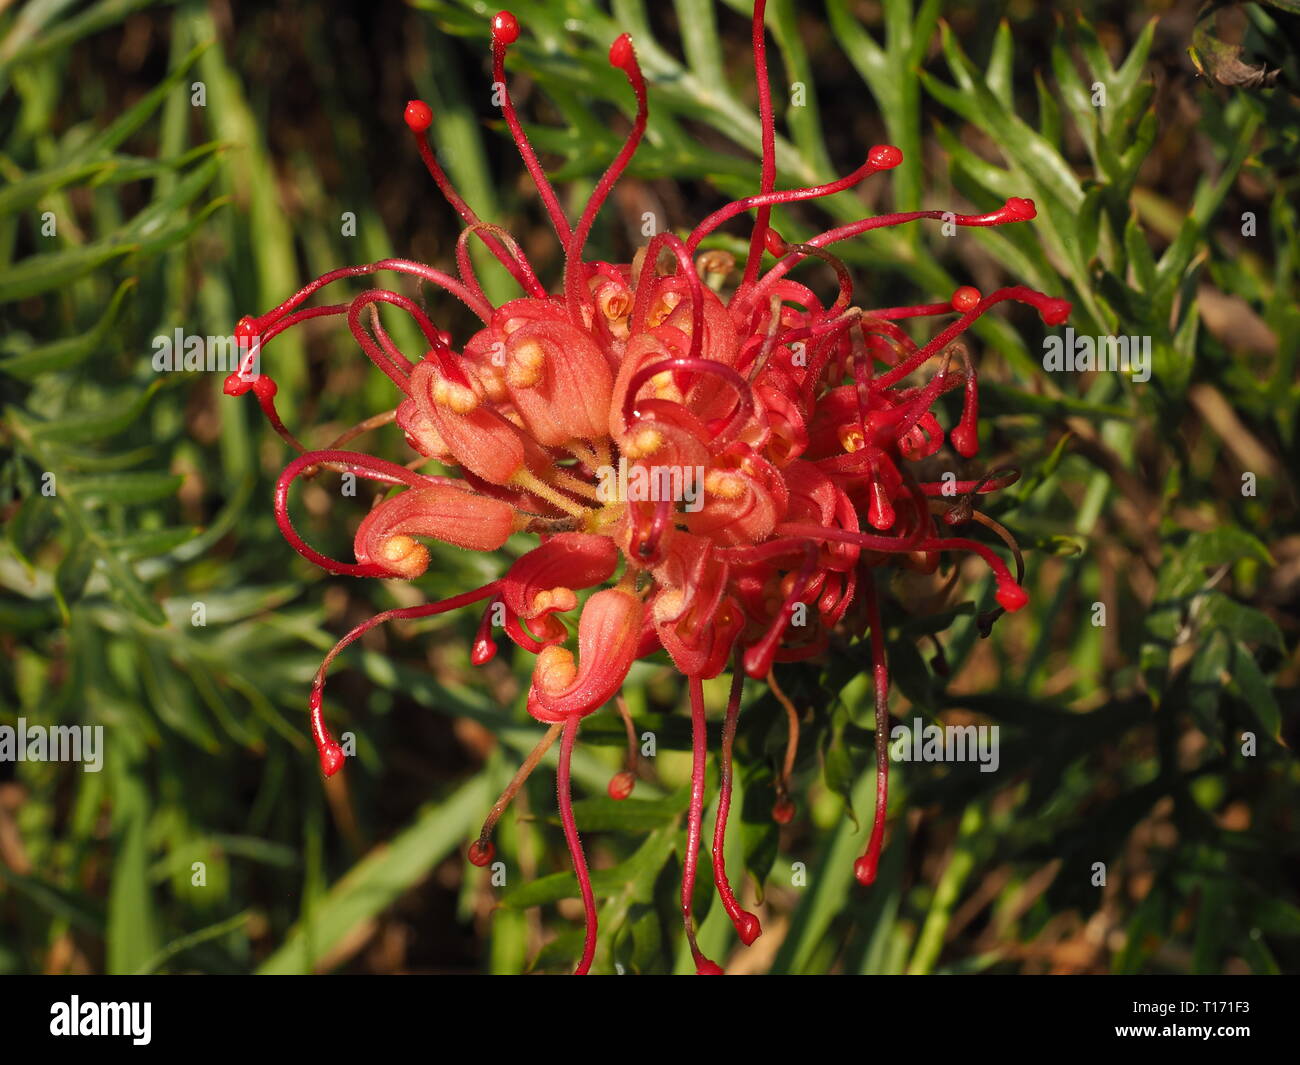 Grevillea flowers. Red petals of the Australian native Grevillea plant in flower. Wild birds are attracted to these flowers. Stock Photo